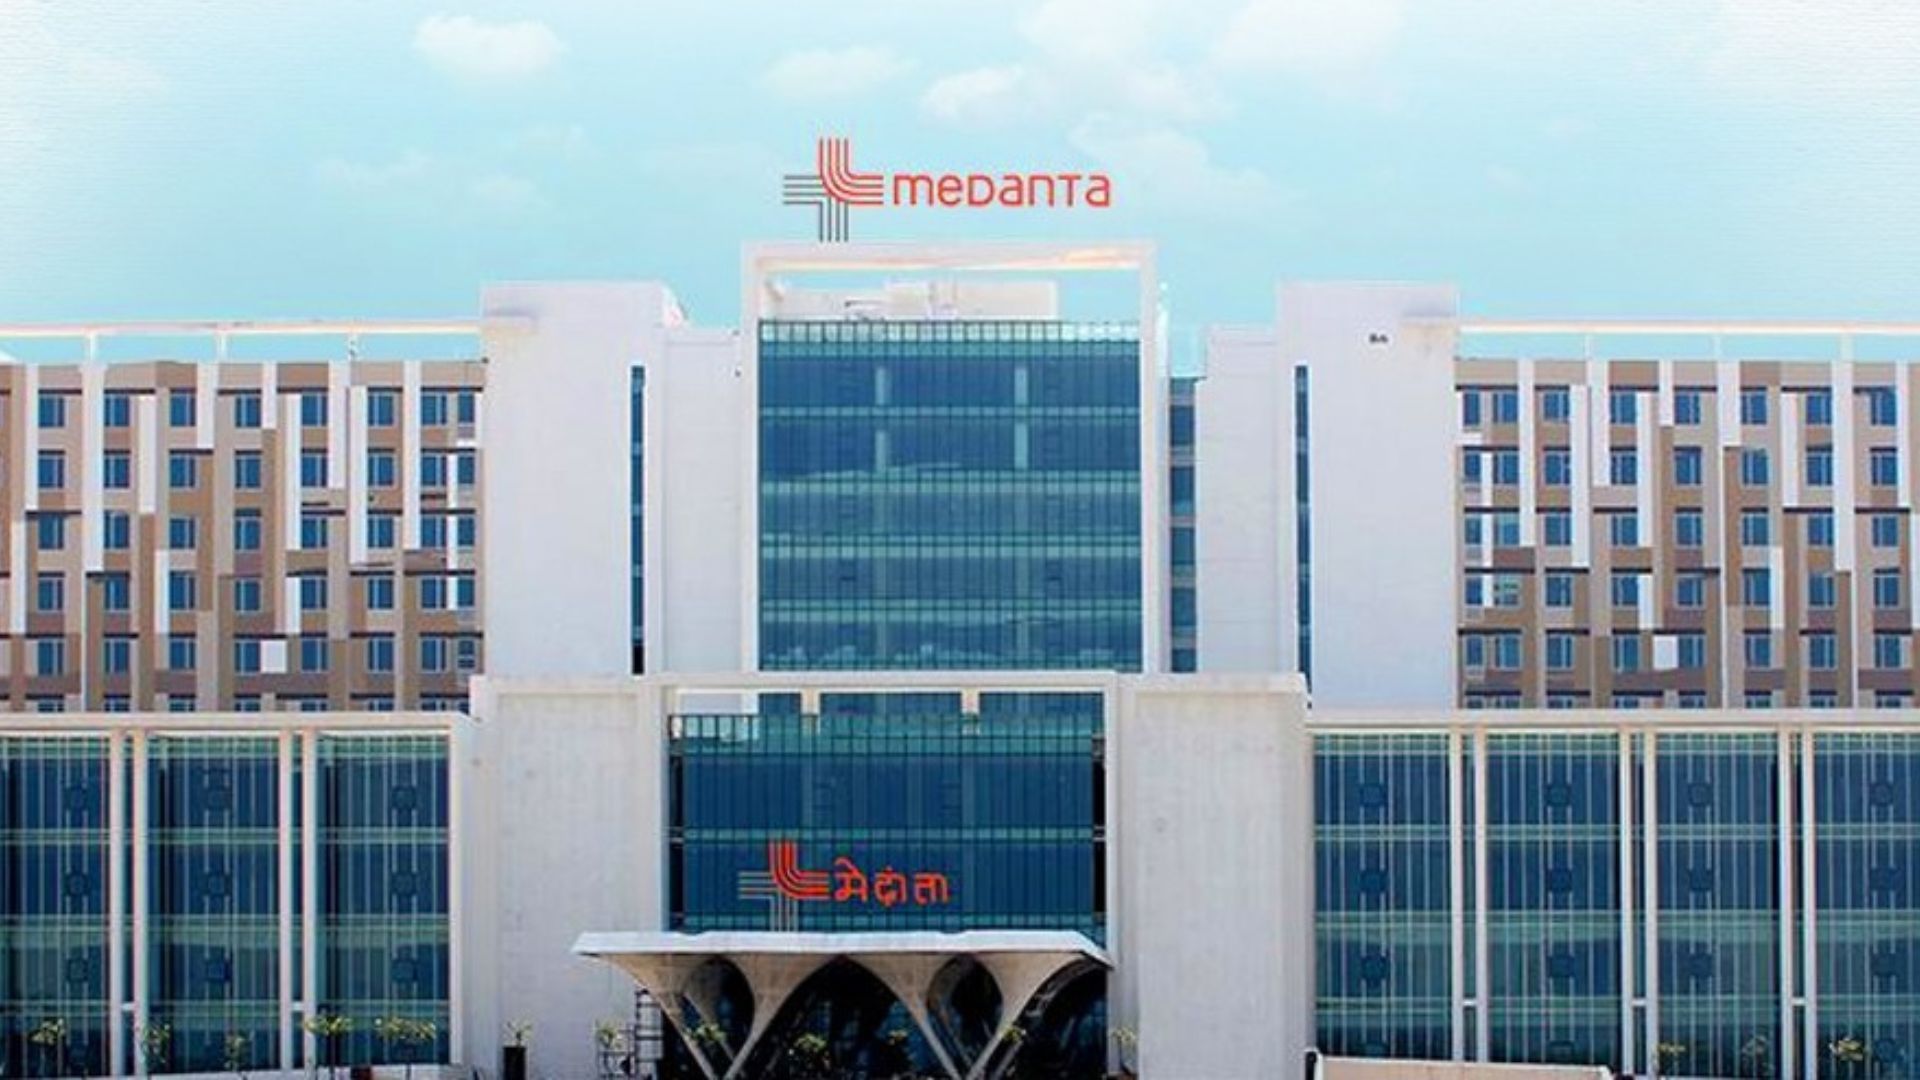 Mulayam Singh Yadav death: All you need to know about Medanta, hospital where SP leader was treated